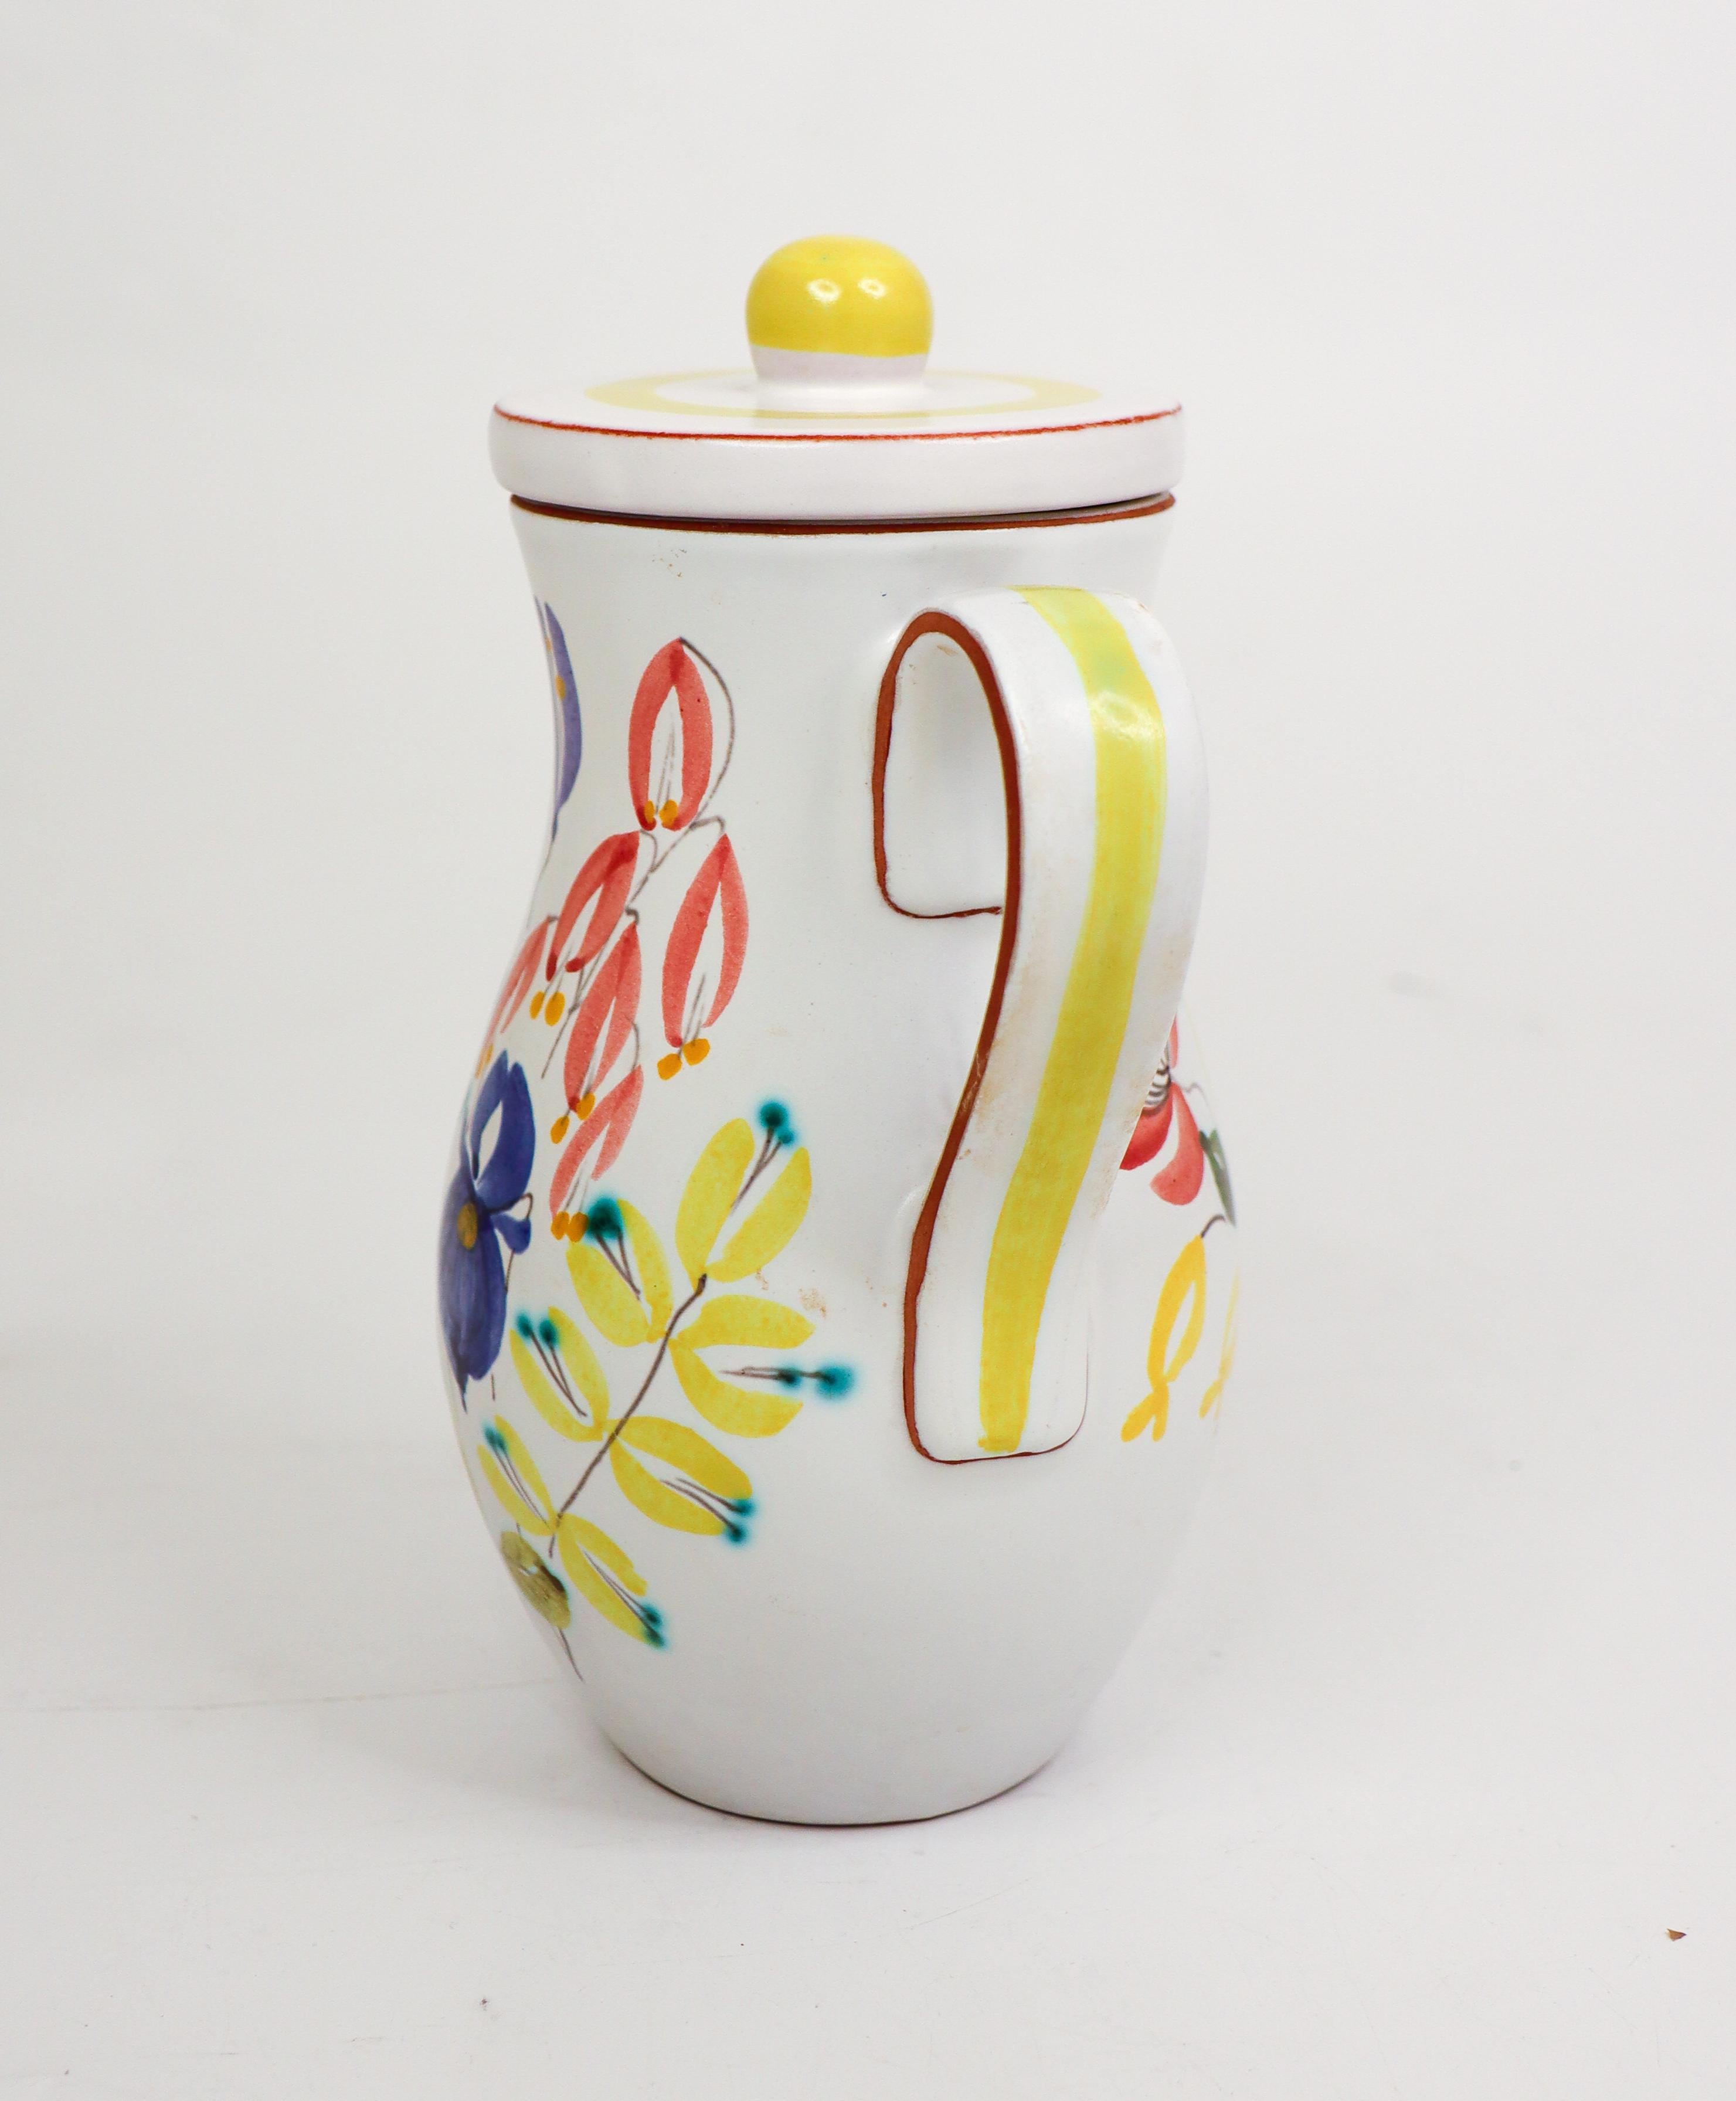 A lovely and rare jug with lid in faience designed by Stig Lindberg at Gustavsberg in the 1950s. The jug is 17,5 cm high and in excellent condition. It is marked below. 

In 1942, Gustavsberg opened the exhibition 